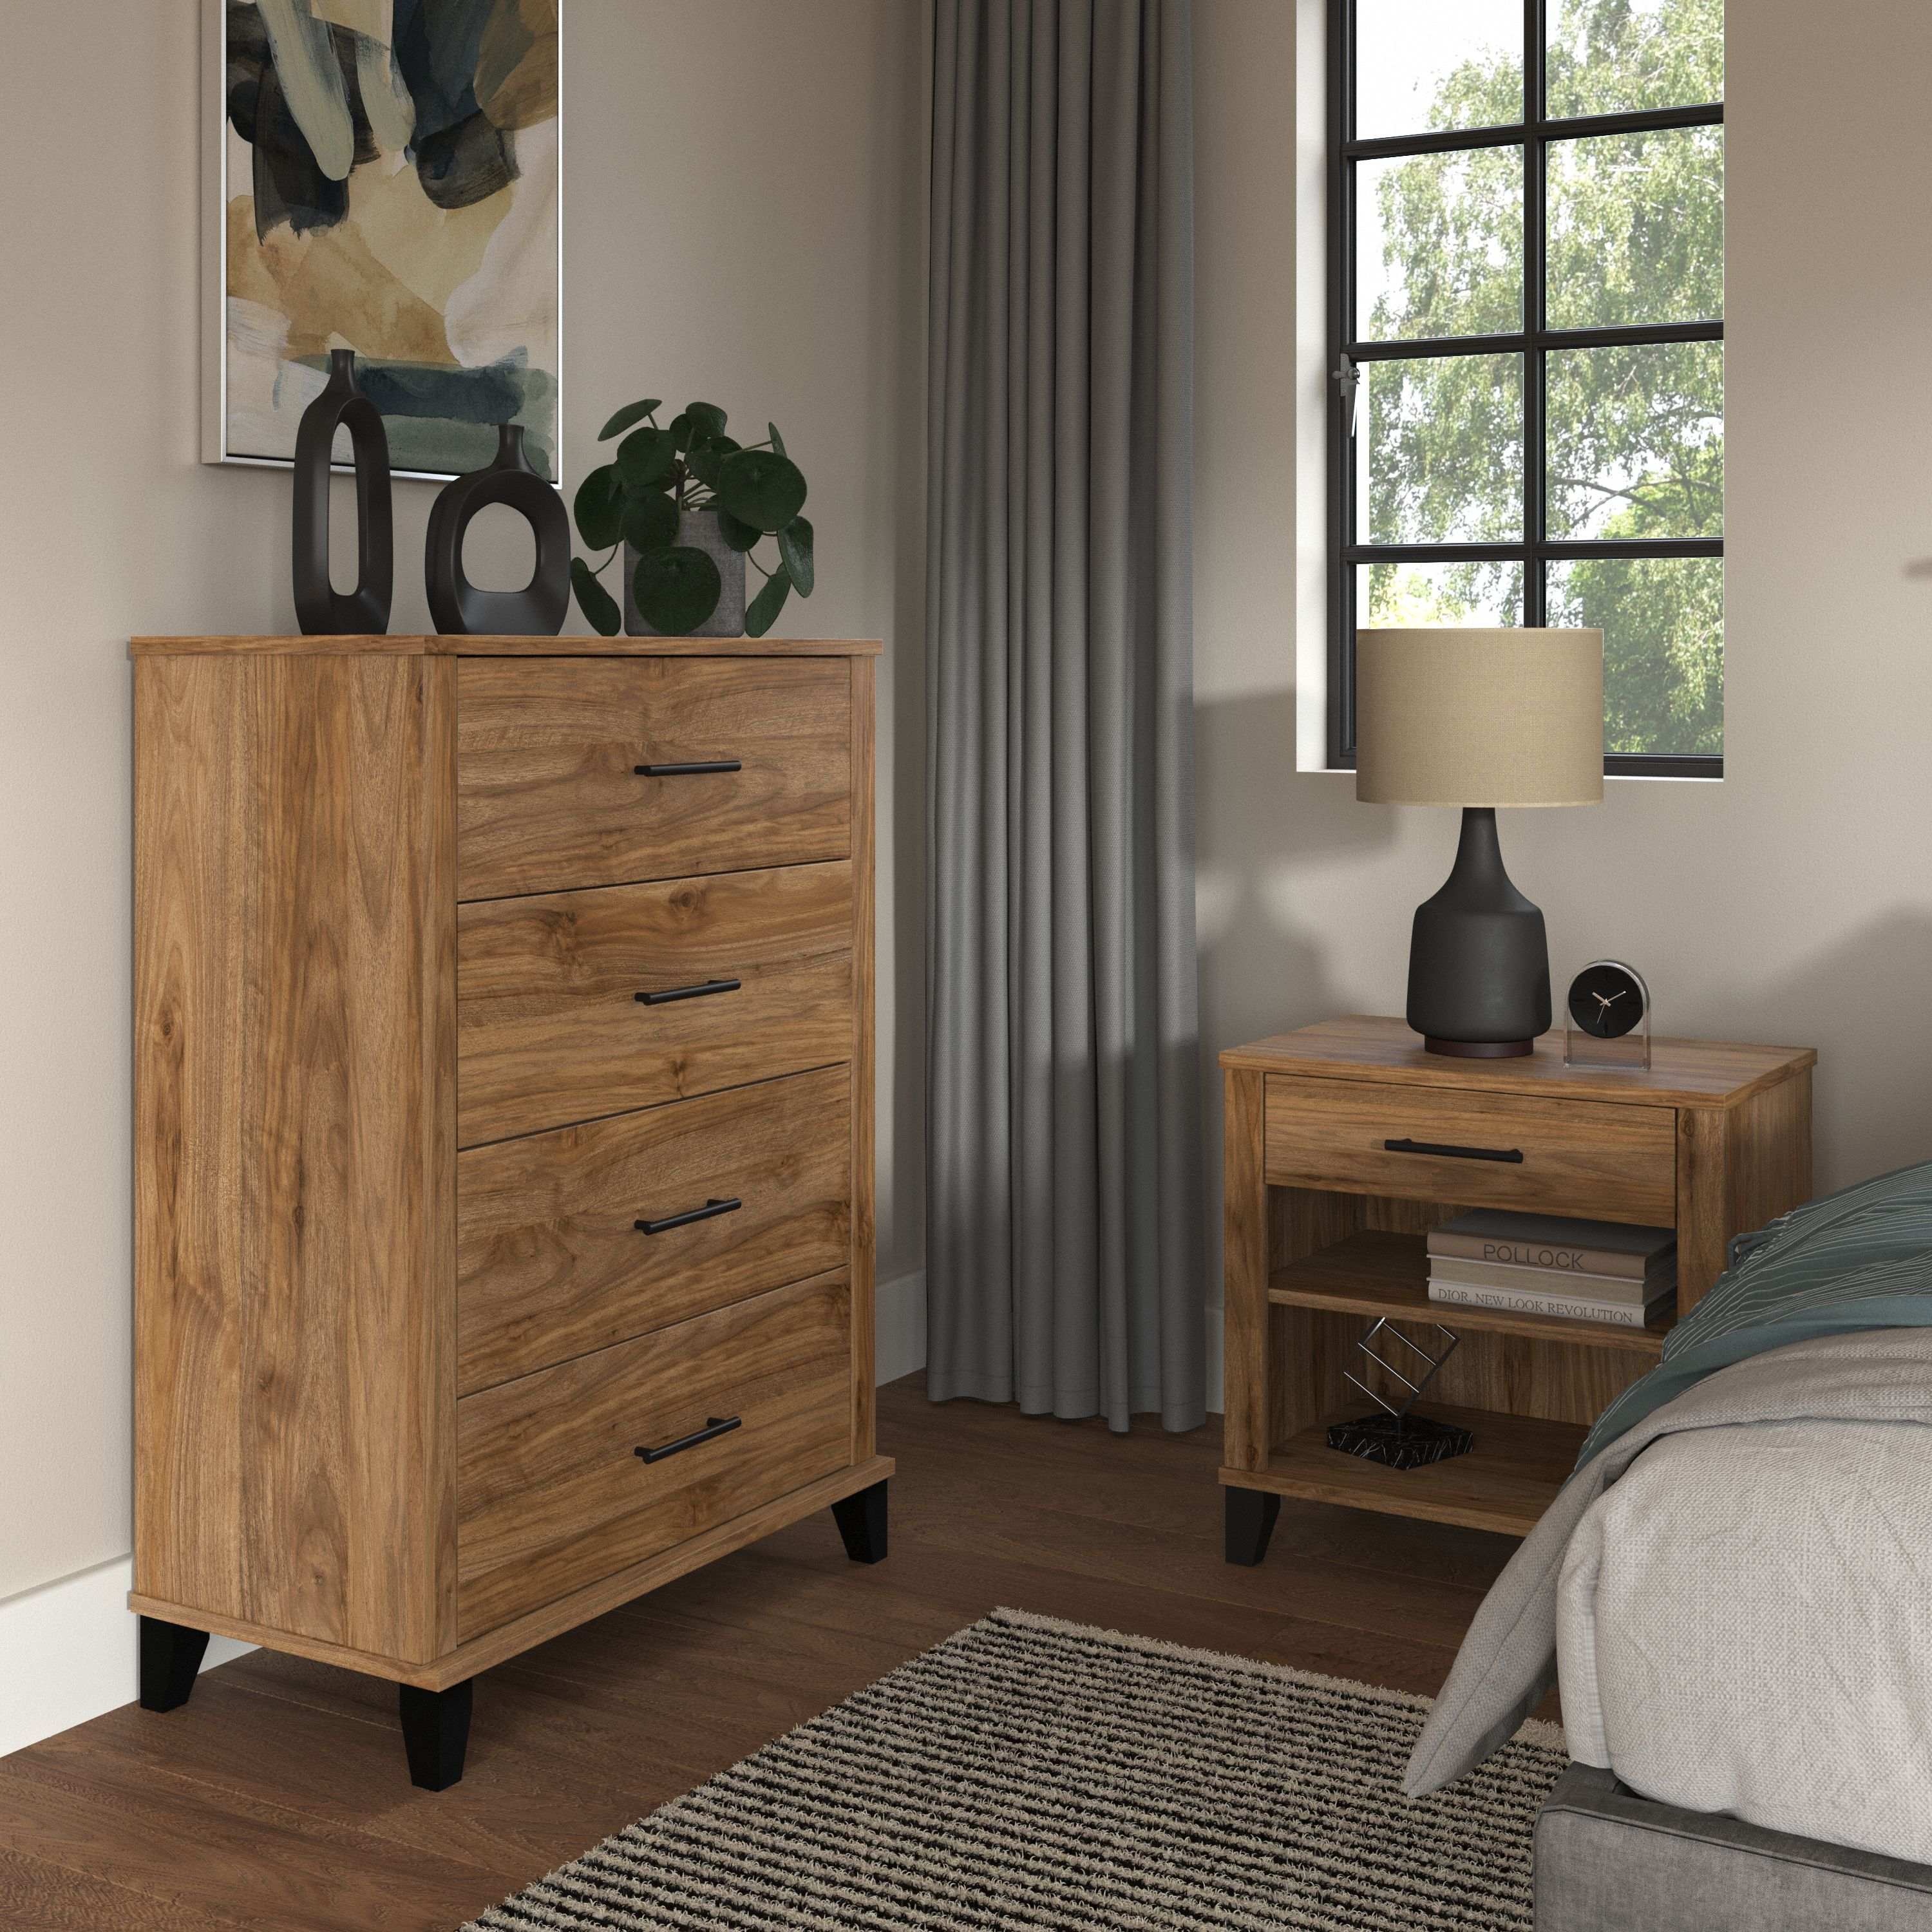 Shop Bush Furniture Somerset Chest of Drawers and Nightstand Set 01 SET034FW #color_fresh walnut